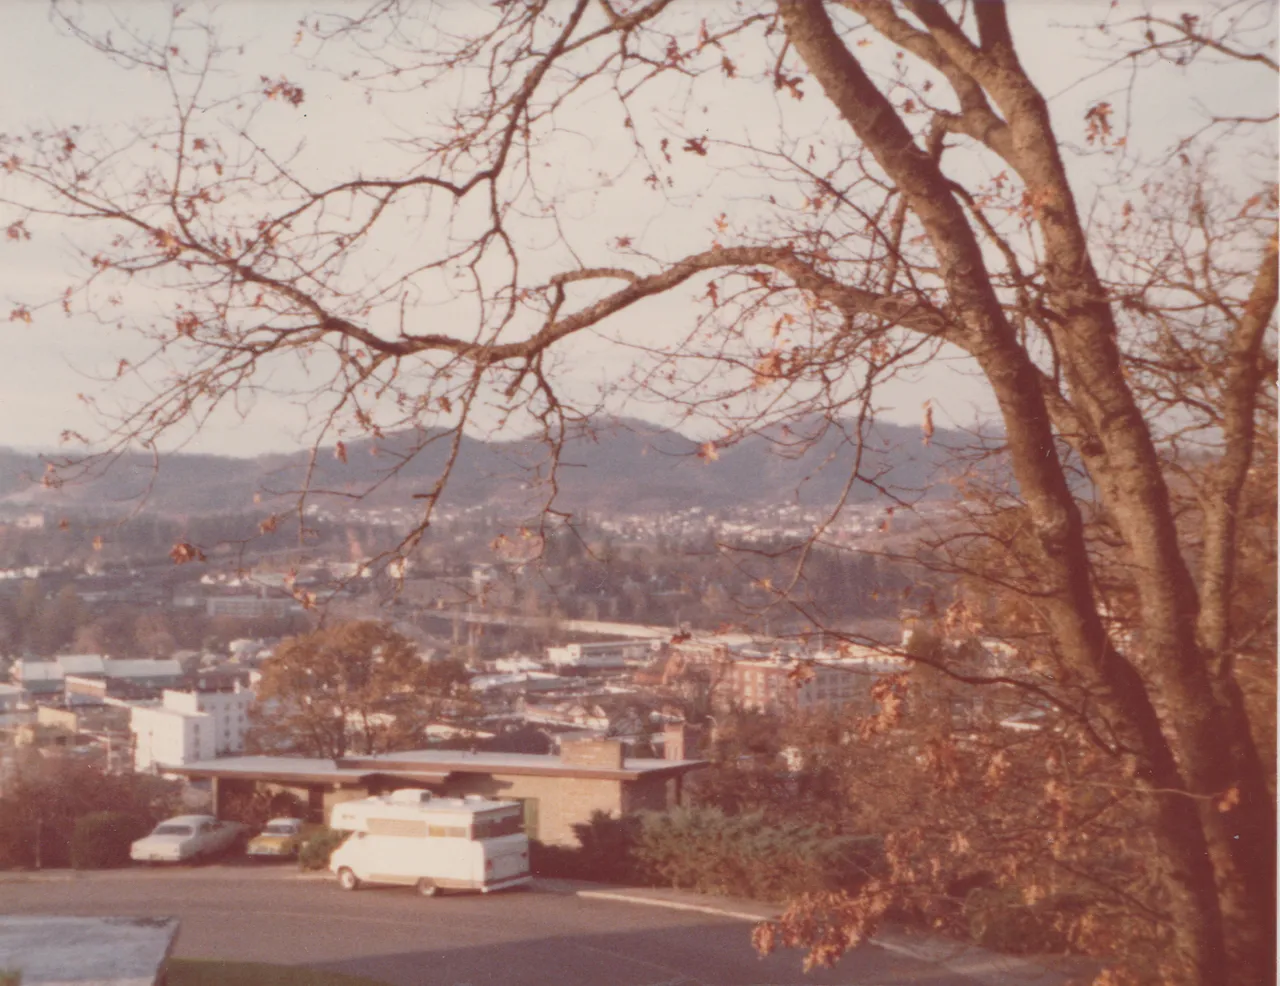 1974-11-28 - Thursday - Thanksgiving, outside view of houses, trees, hill, 3pics-3.png